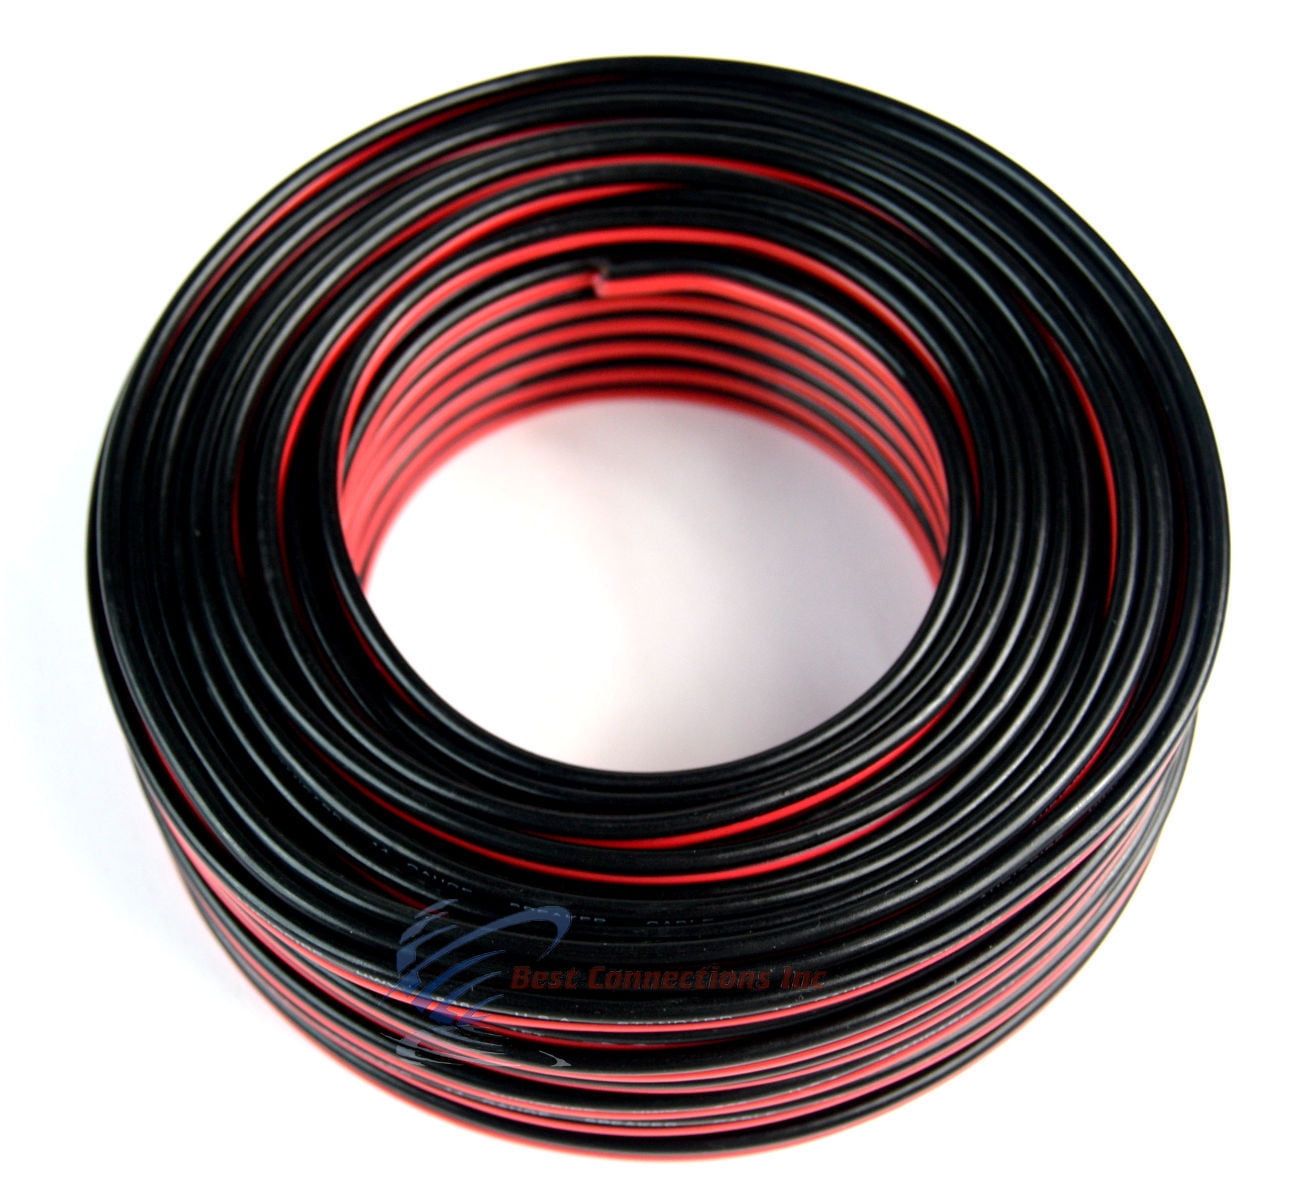 18 Gauge 100 Feet 2 Conductor Stranded Speaker Wire For Car or Home Audio 100ft 